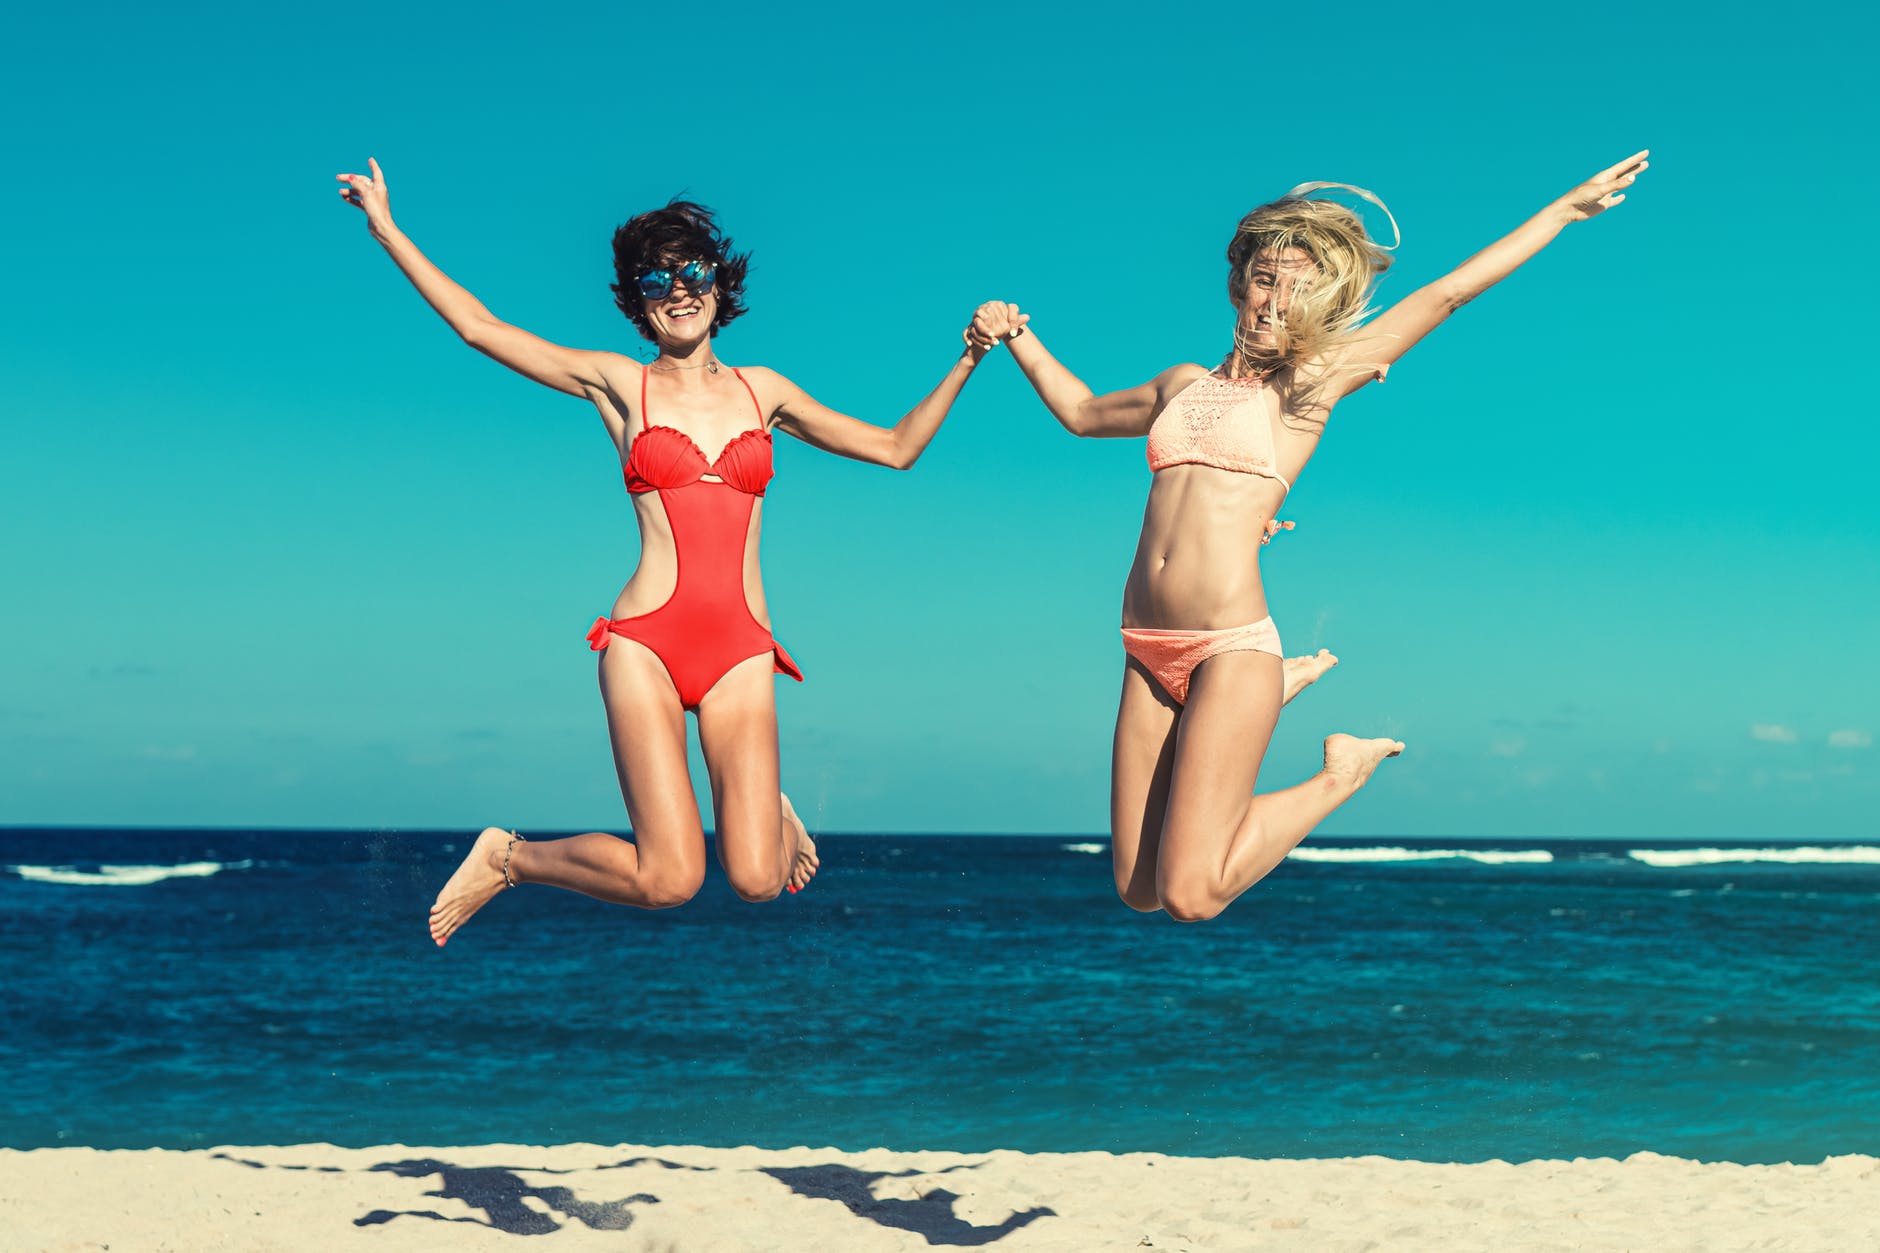 Women jumping  in beach background | Franklin, TN | Shara Smile